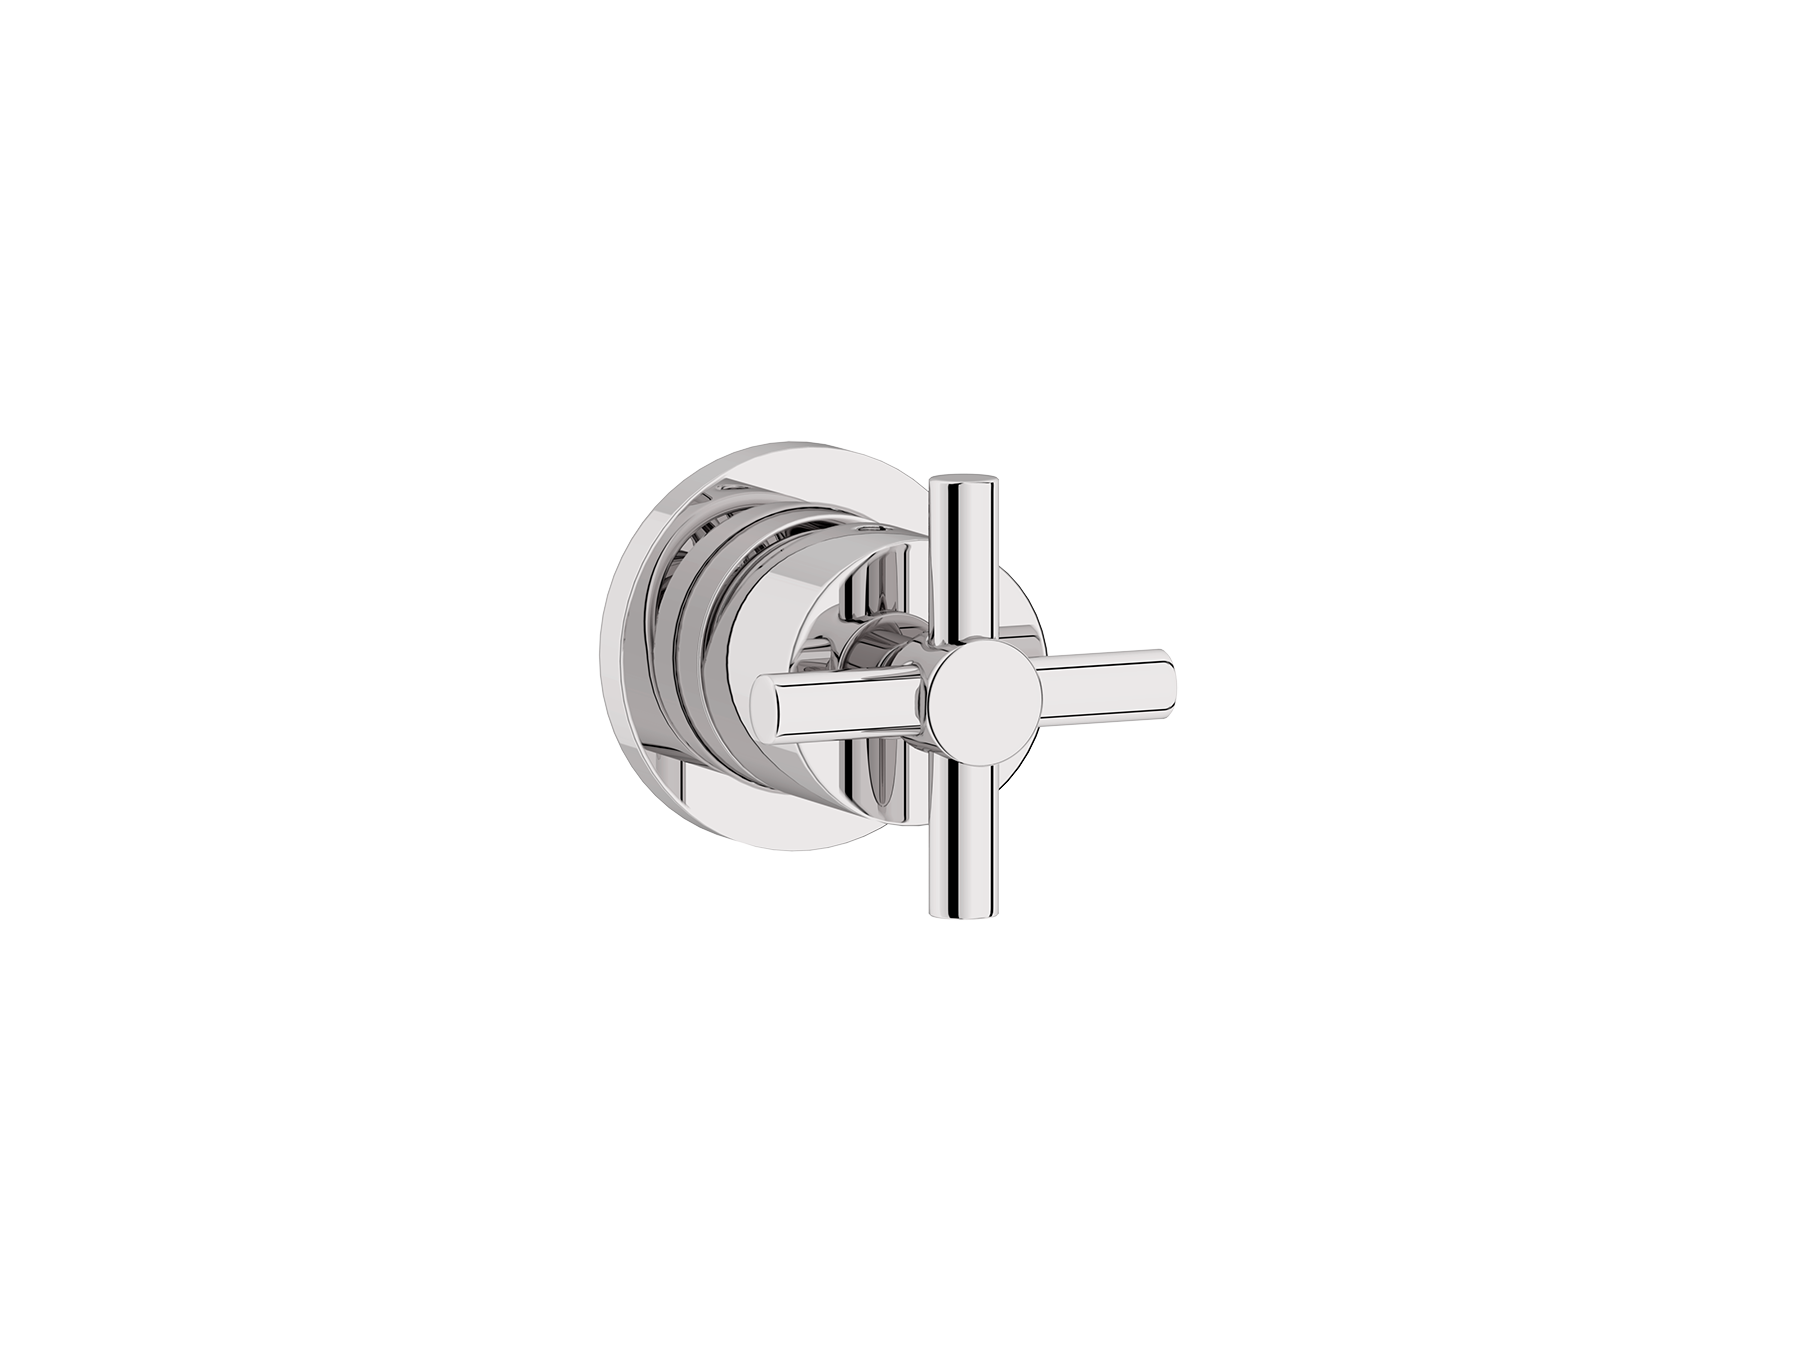 Concealed single-lever mixer